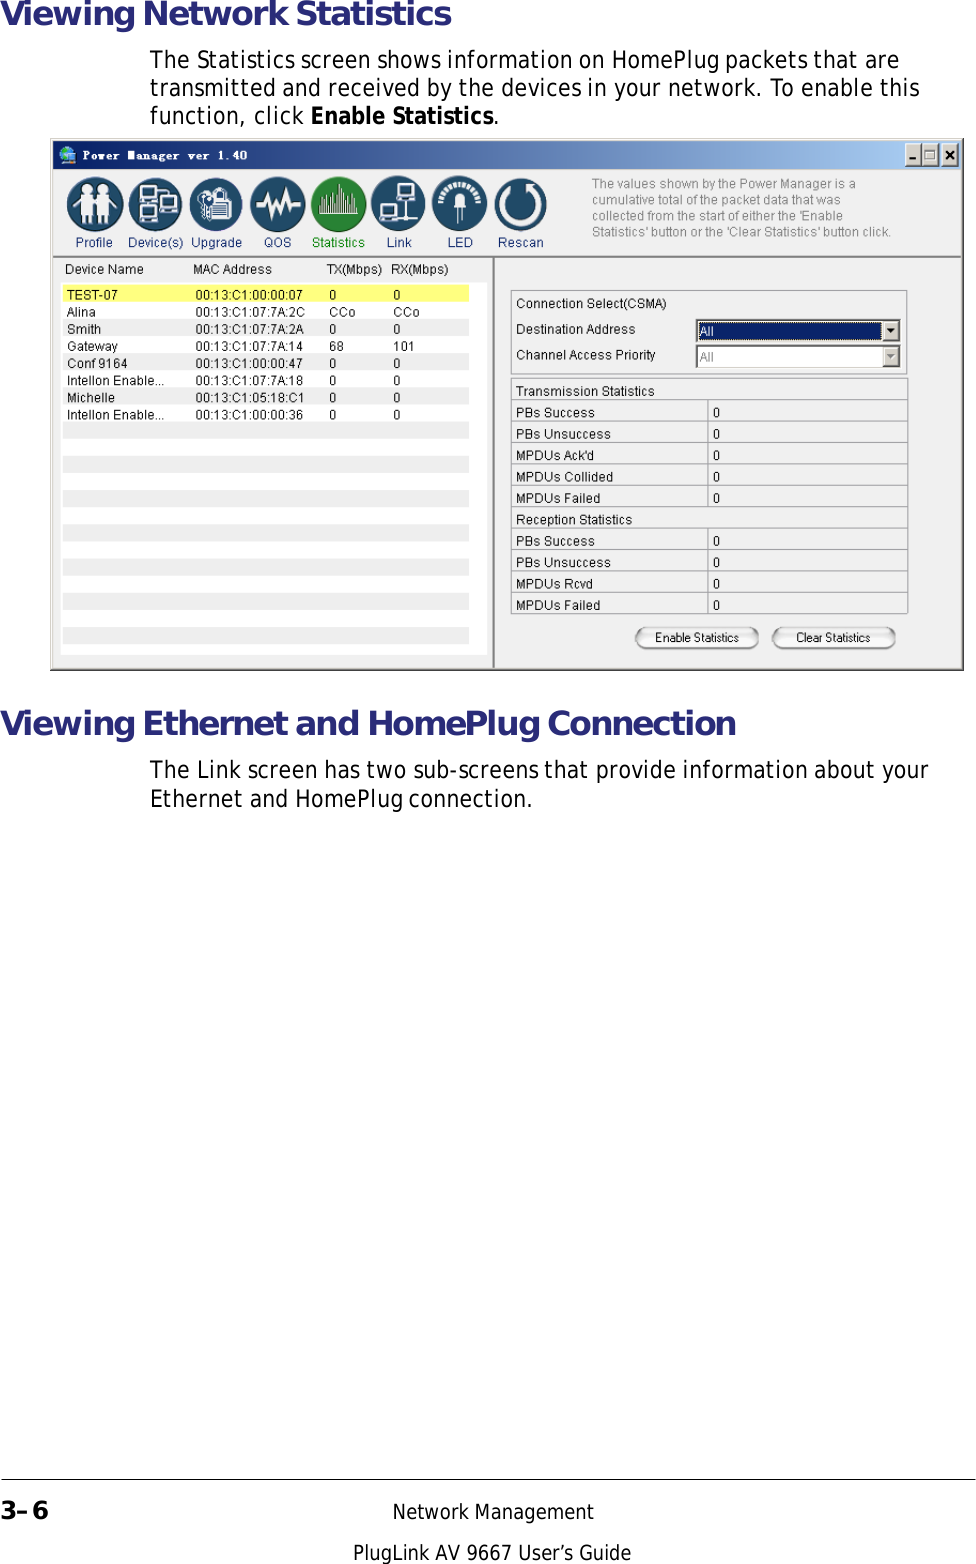   Viewing Network Statistics  The Statistics screen shows information on HomePlug packets that are transmitted and received by the devices in your network. To enable this function, click Enable Statistics.              Viewing Ethernet and HomePlug Connection  The Link screen has two sub-screens that provide information about your Ethernet and HomePlug connection.                                 3–6  Network Management  PlugLink AV 9667 User’s Guide 